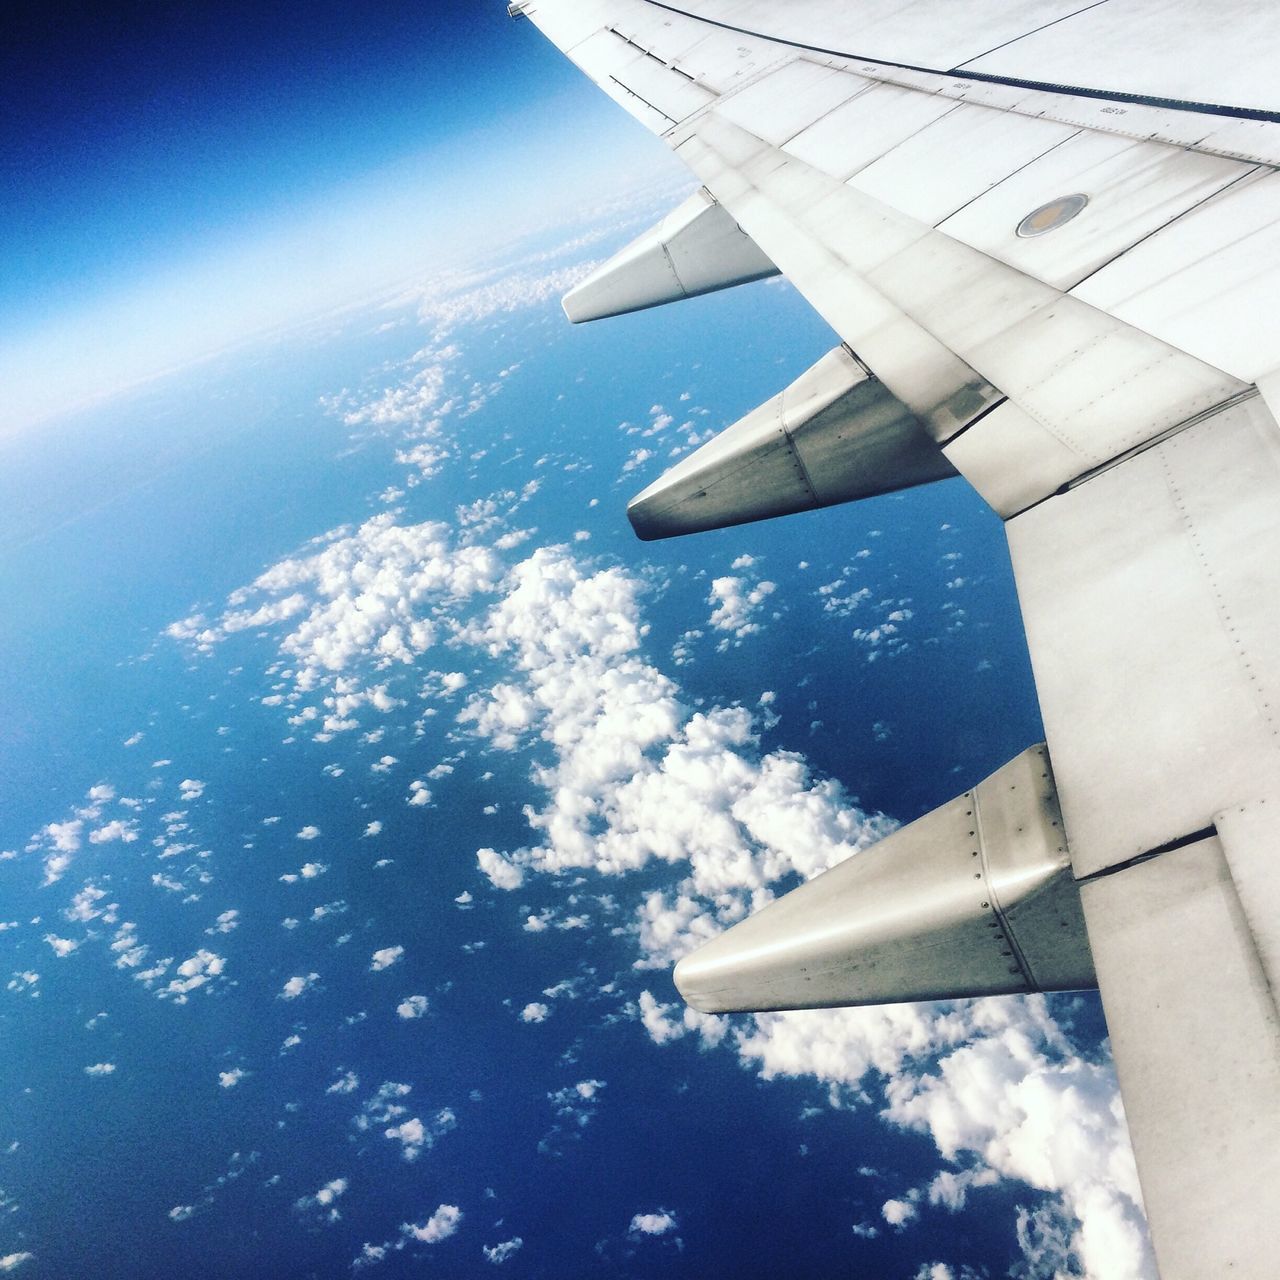 aircraft wing, airplane, transportation, air vehicle, mode of transport, flying, part of, aerial view, cropped, journey, travel, sky, mid-air, sea, on the move, scenics, airplane wing, blue, nature, beauty in nature